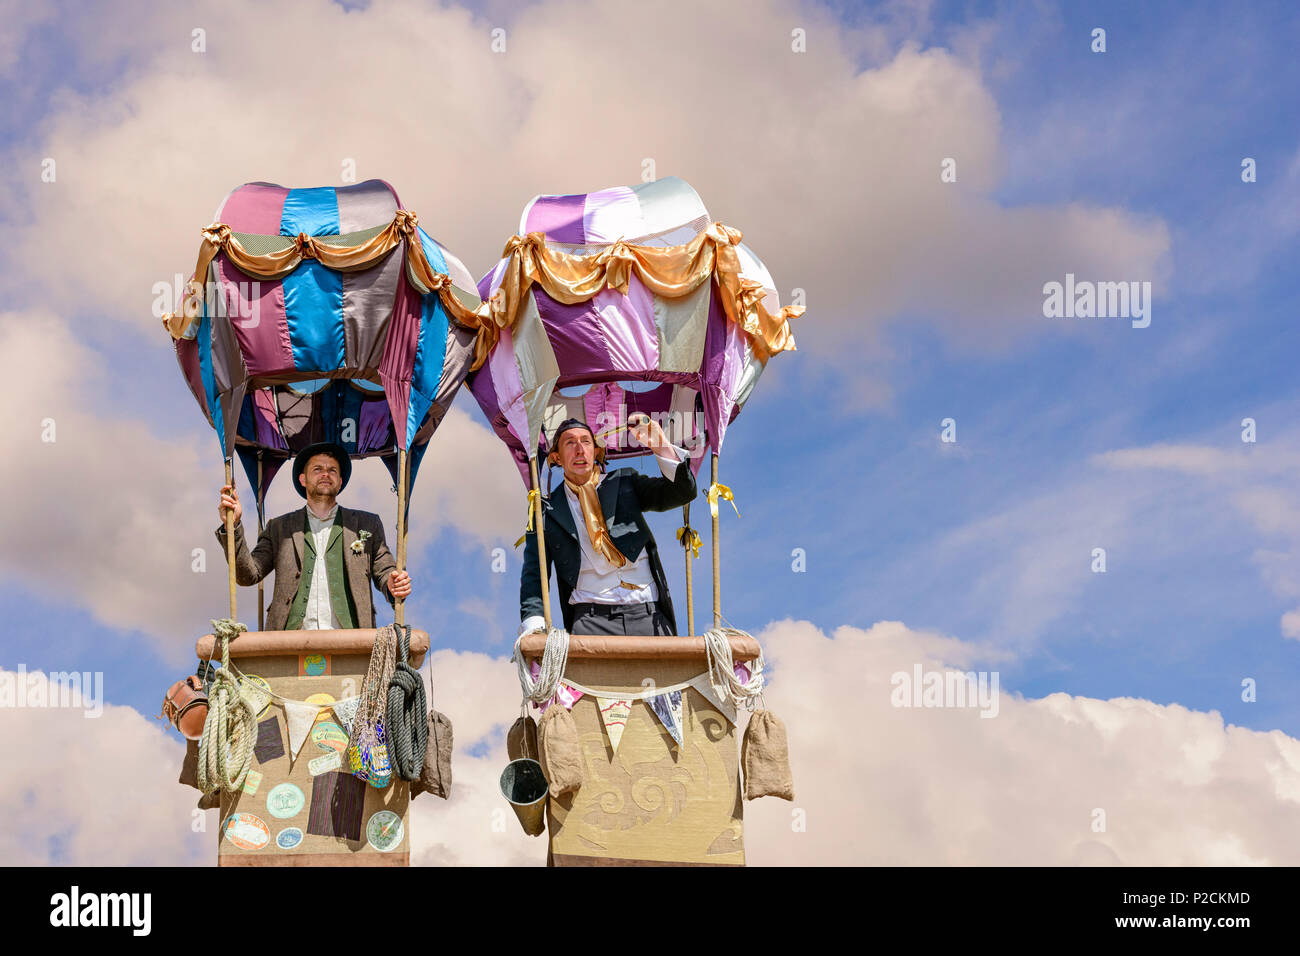 Two street entertaines in mock hot air balloons Stock Photo